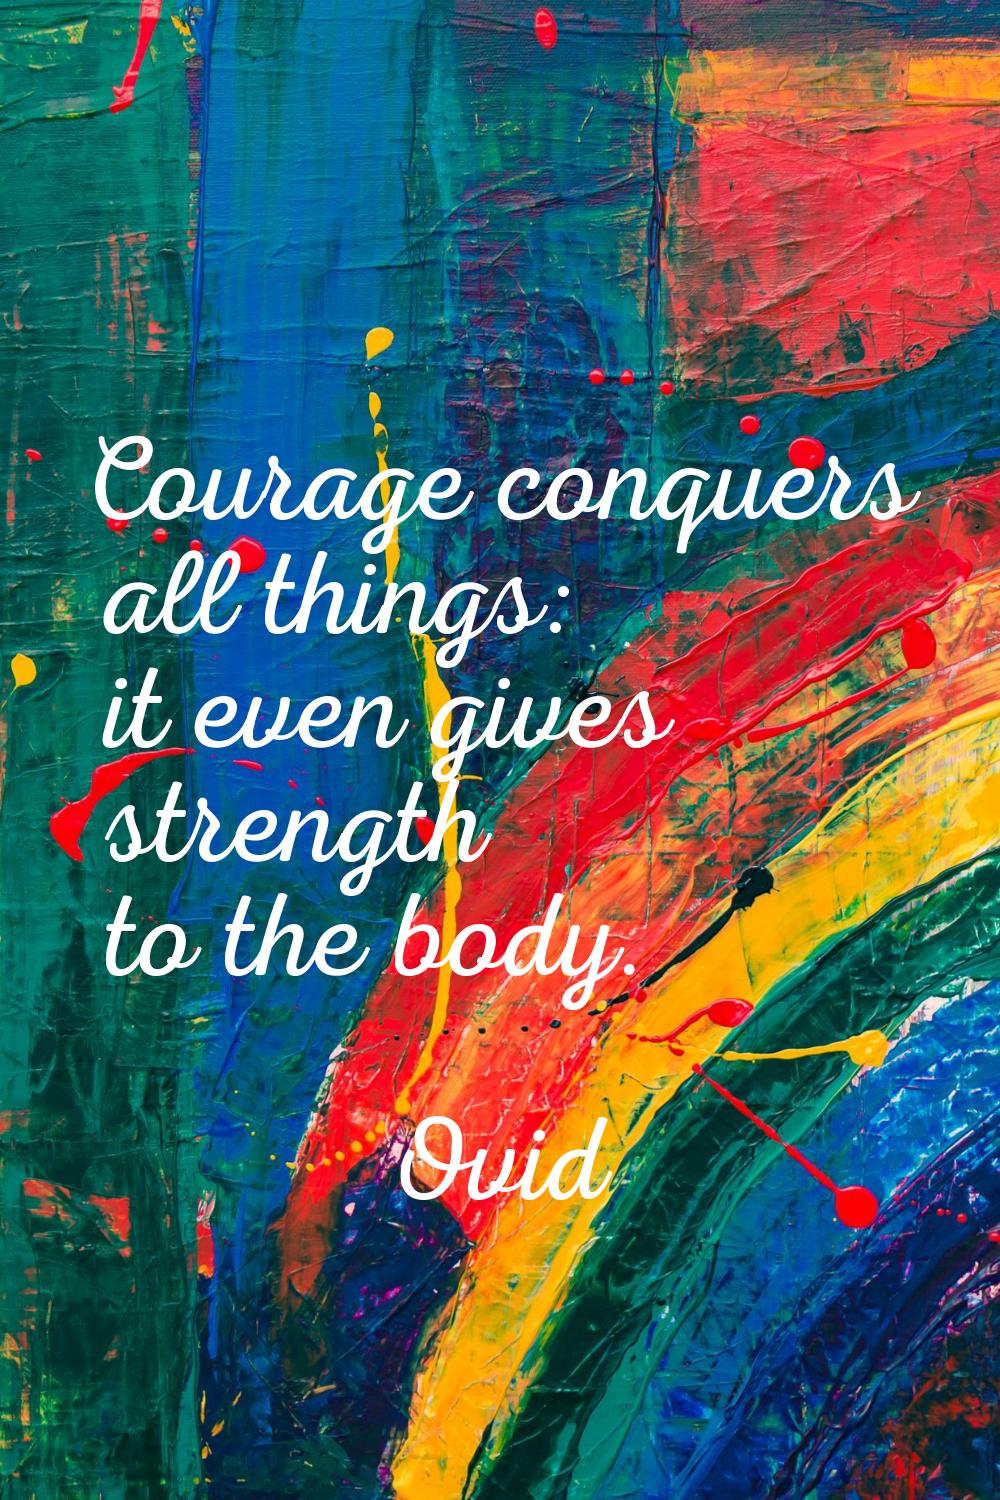 Courage conquers all things: it even gives strength to the body.